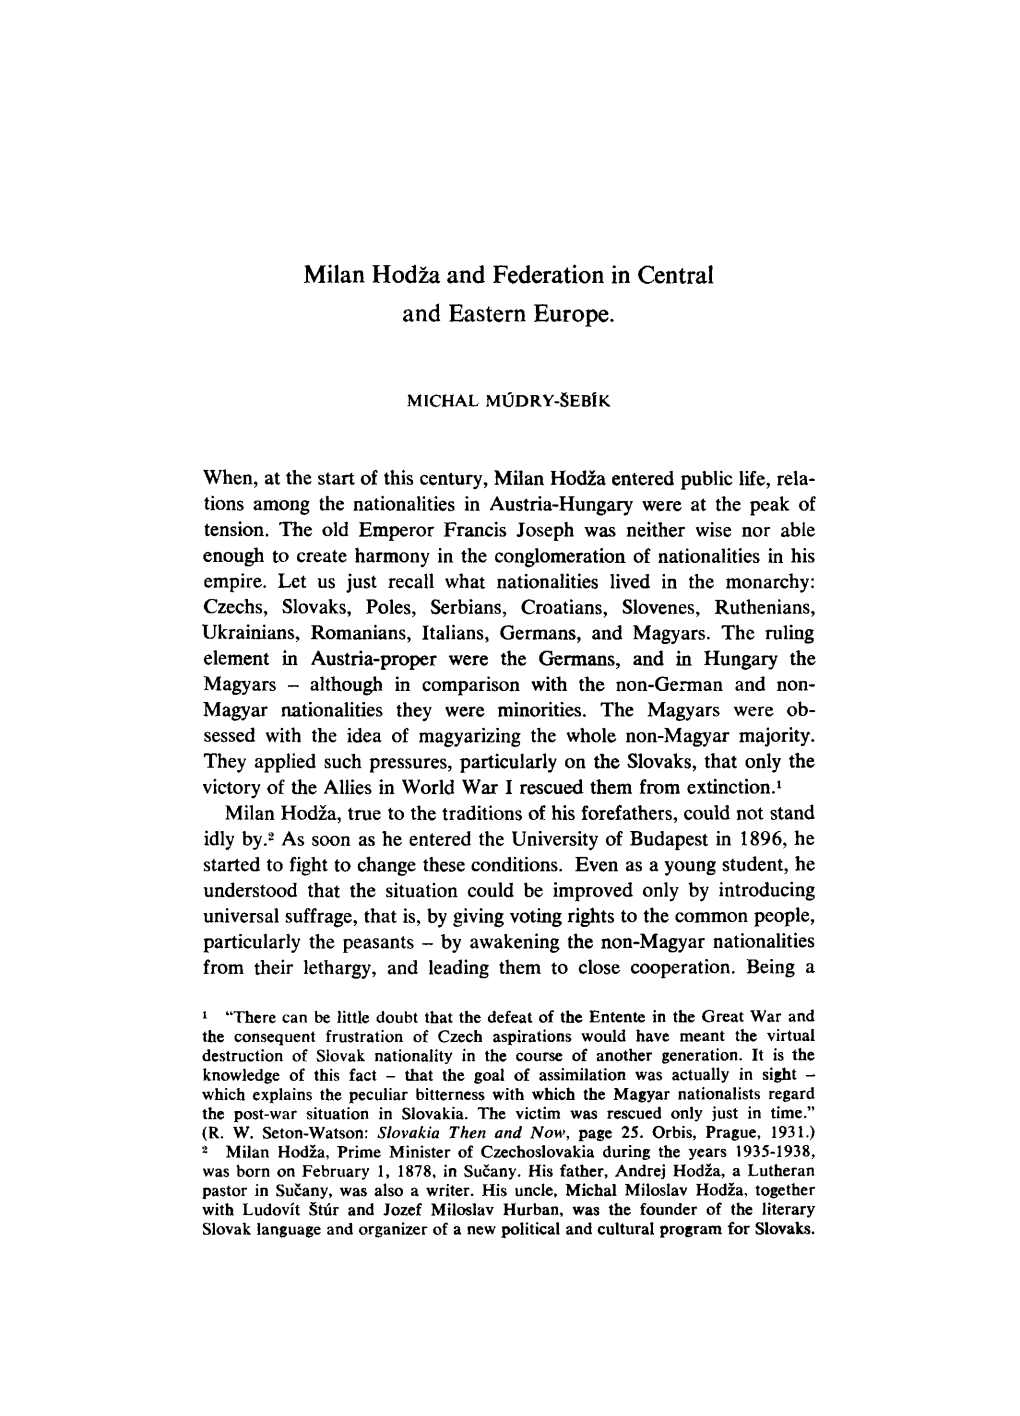 Milan Hodza and Federation in Central and Eastern Europe